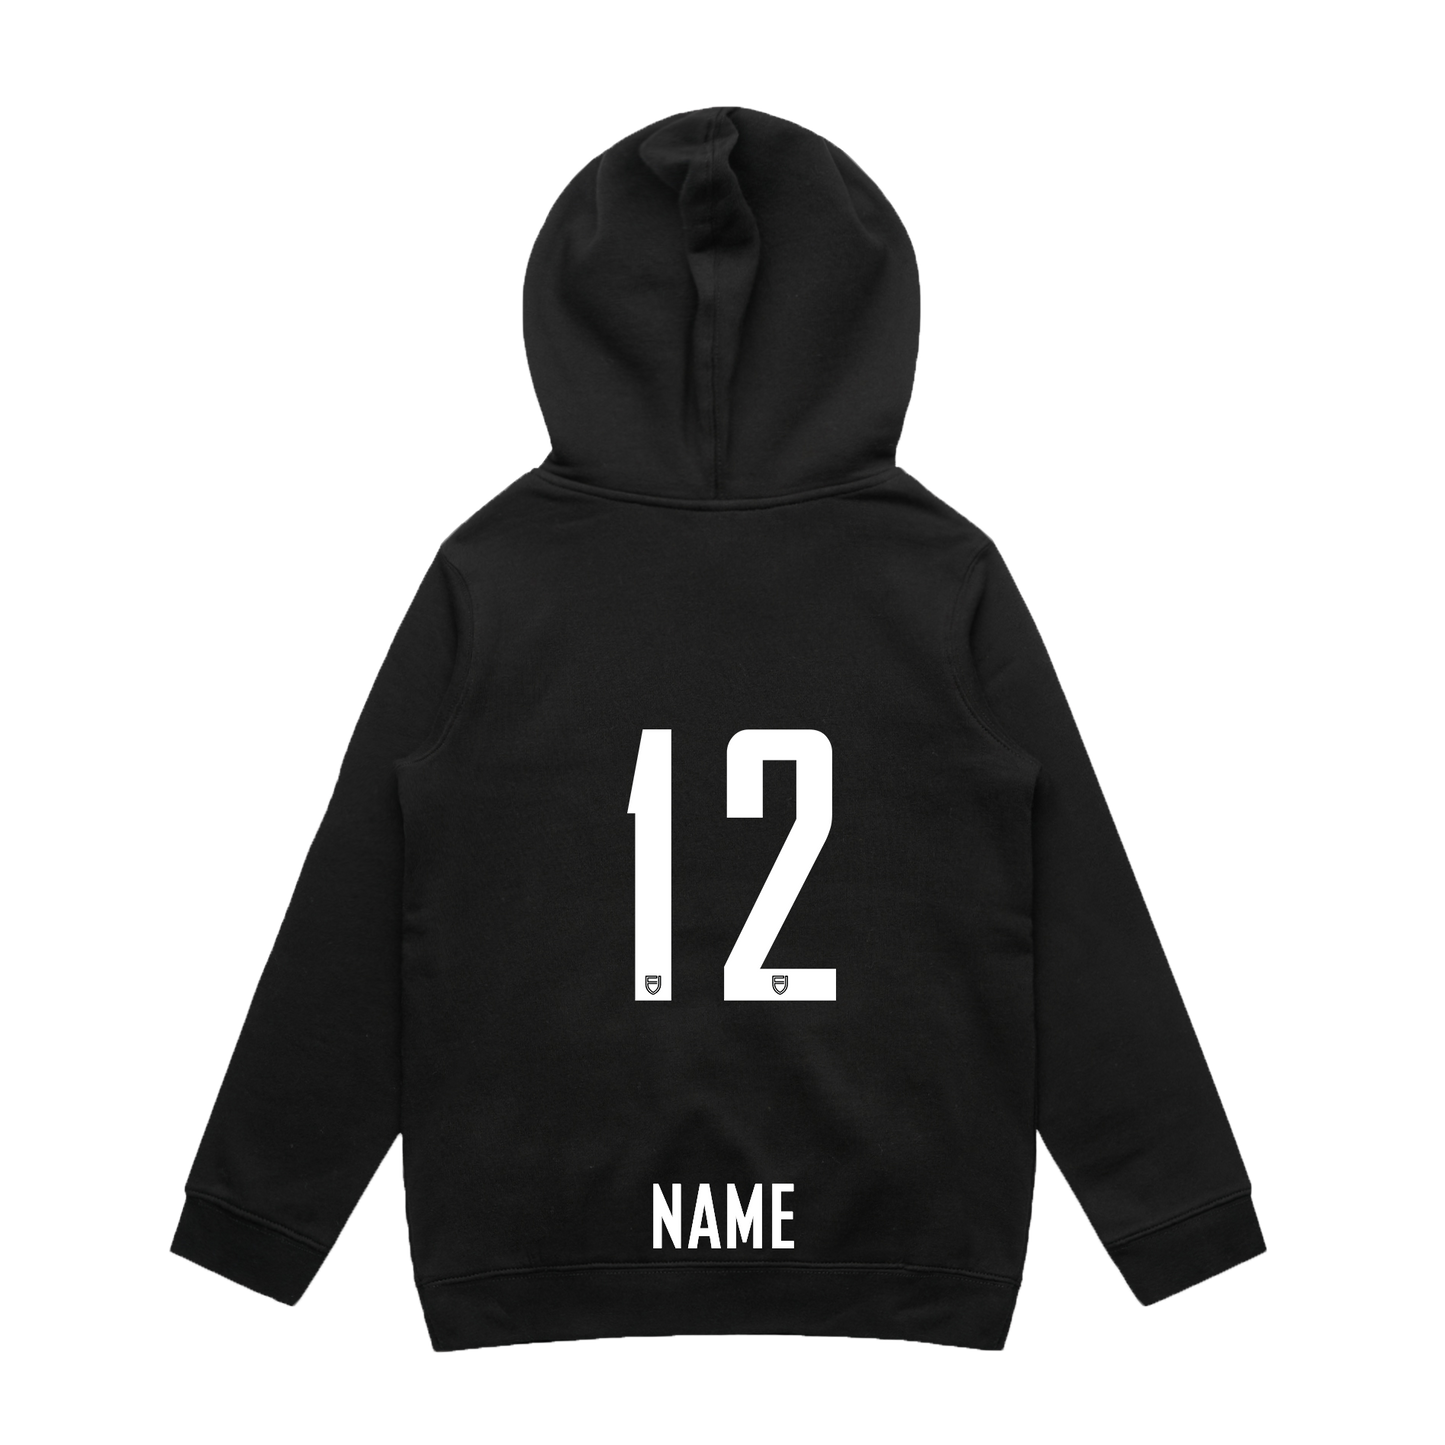 GREYTOWN JUNIOR FC GRAPHIC HOODIE - YOUTH'S